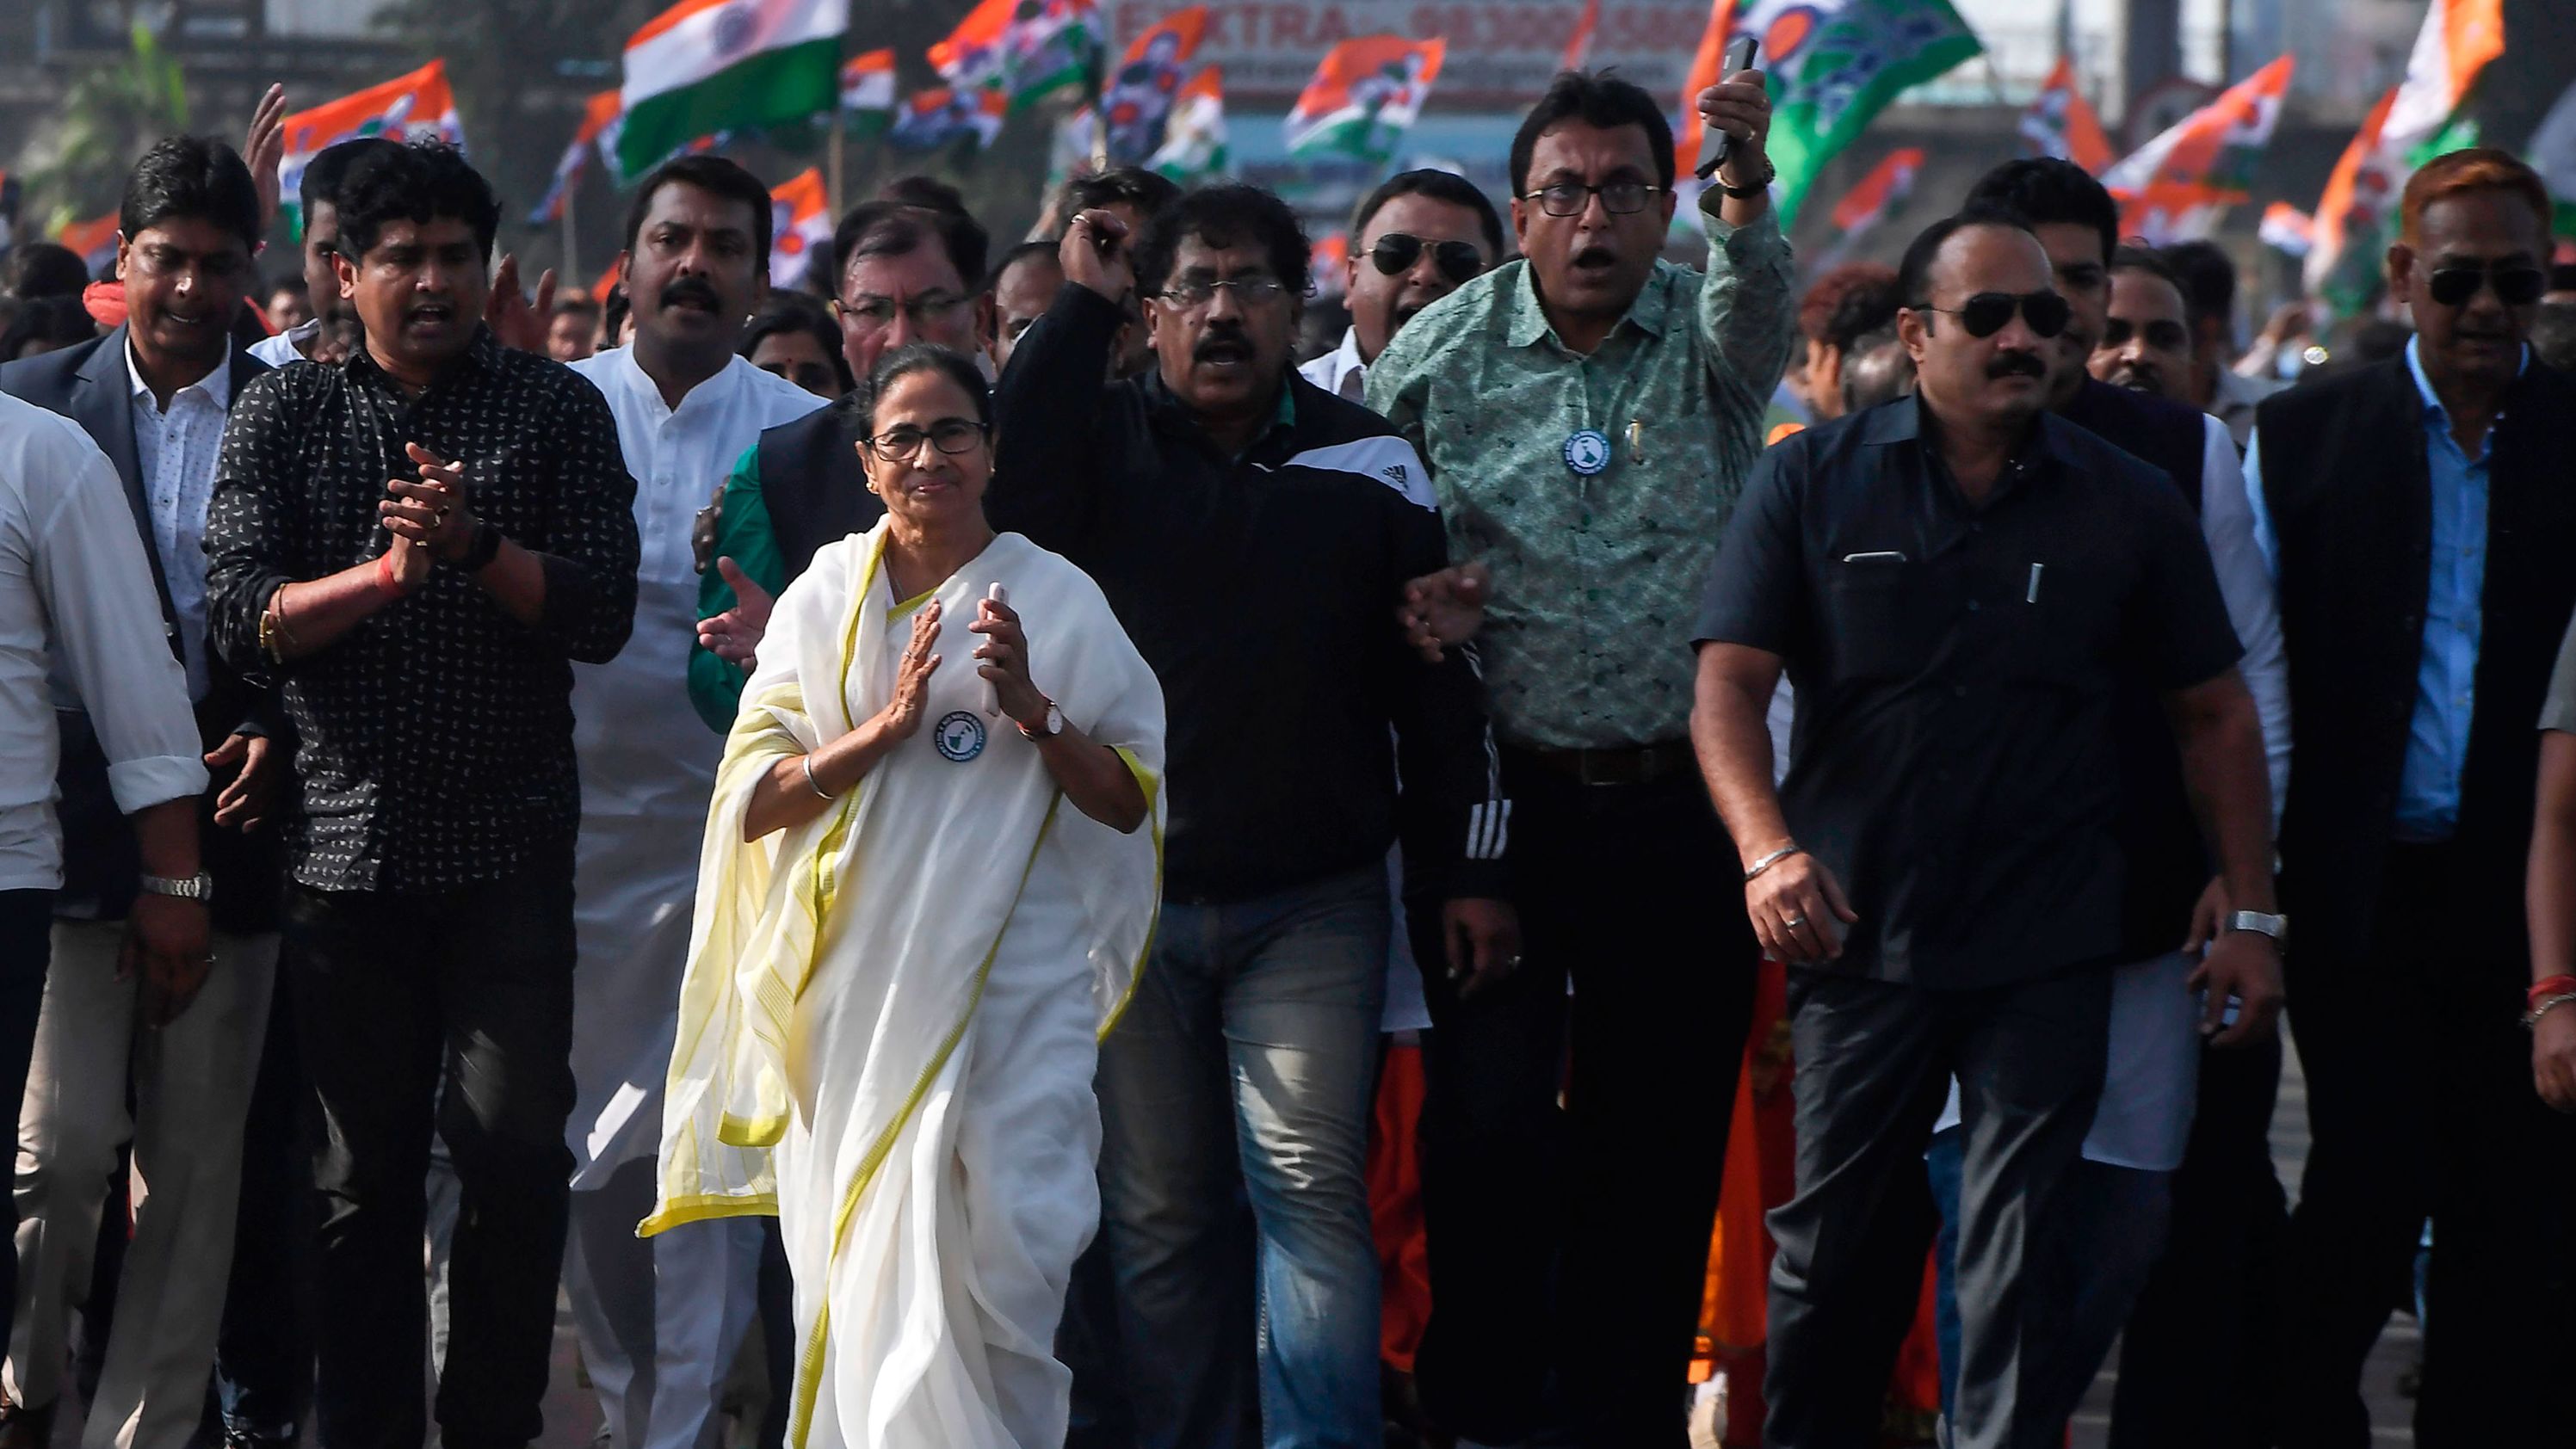 Chief minister of West Bengal state and leader of the Trinamool Congress Mamata Banerjee, along with party supporters, walks in a mass rally across Howrah bridge in Kolkata on December 18.